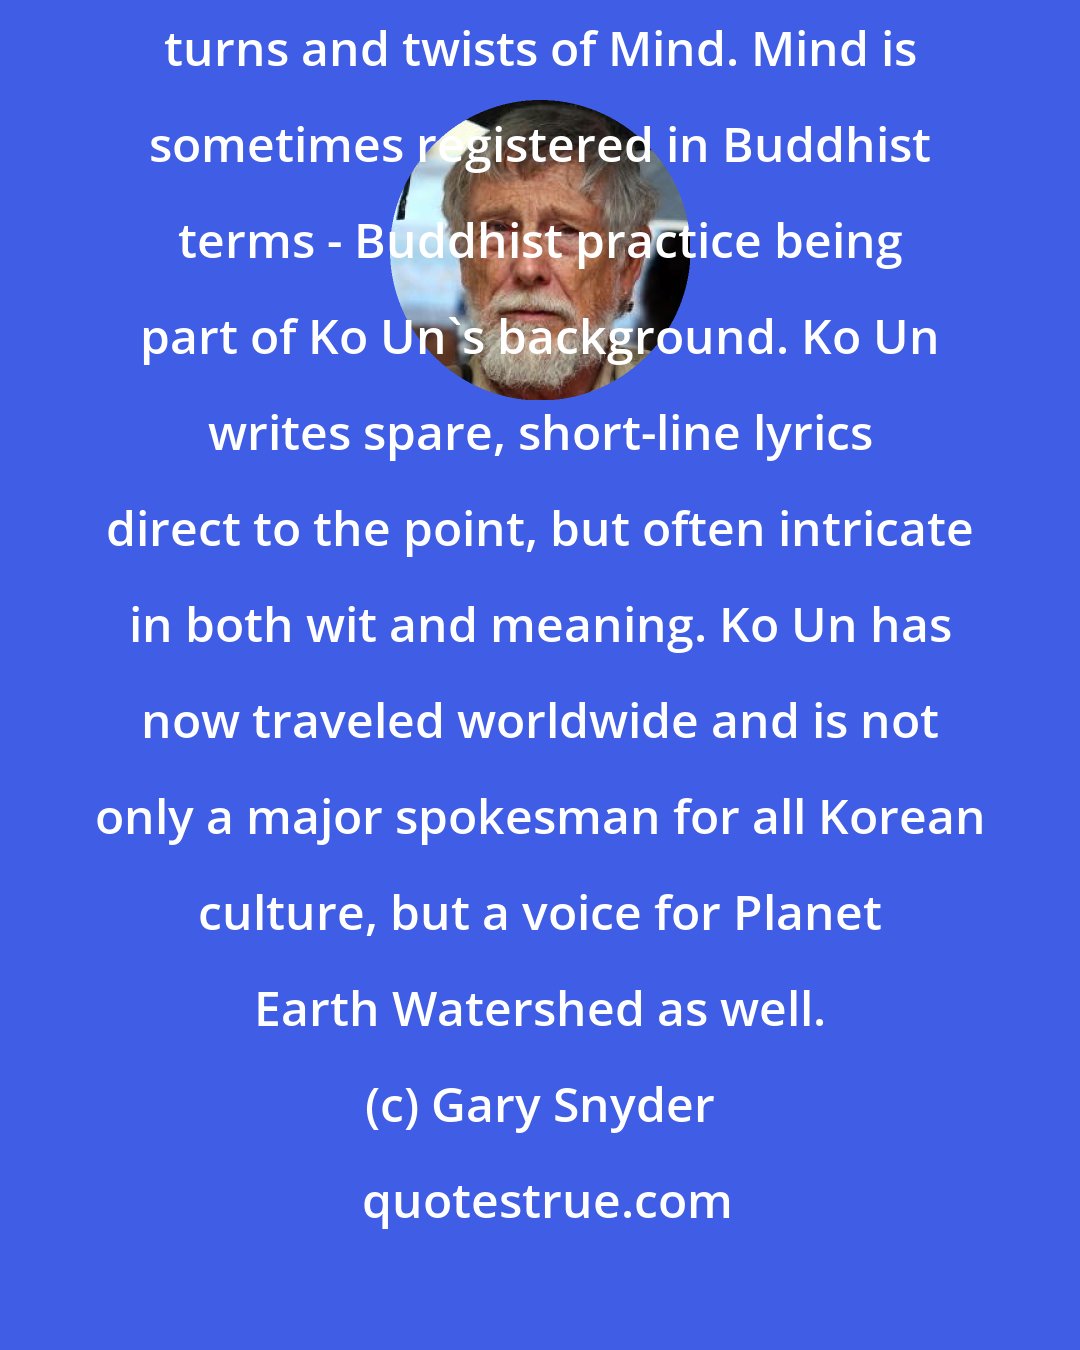 Gary Snyder: Ko Un's poems evoke the open creativity and fluidity of nature, and funny turns and twists of Mind. Mind is sometimes registered in Buddhist terms - Buddhist practice being part of Ko Un's background. Ko Un writes spare, short-line lyrics direct to the point, but often intricate in both wit and meaning. Ko Un has now traveled worldwide and is not only a major spokesman for all Korean culture, but a voice for Planet Earth Watershed as well.